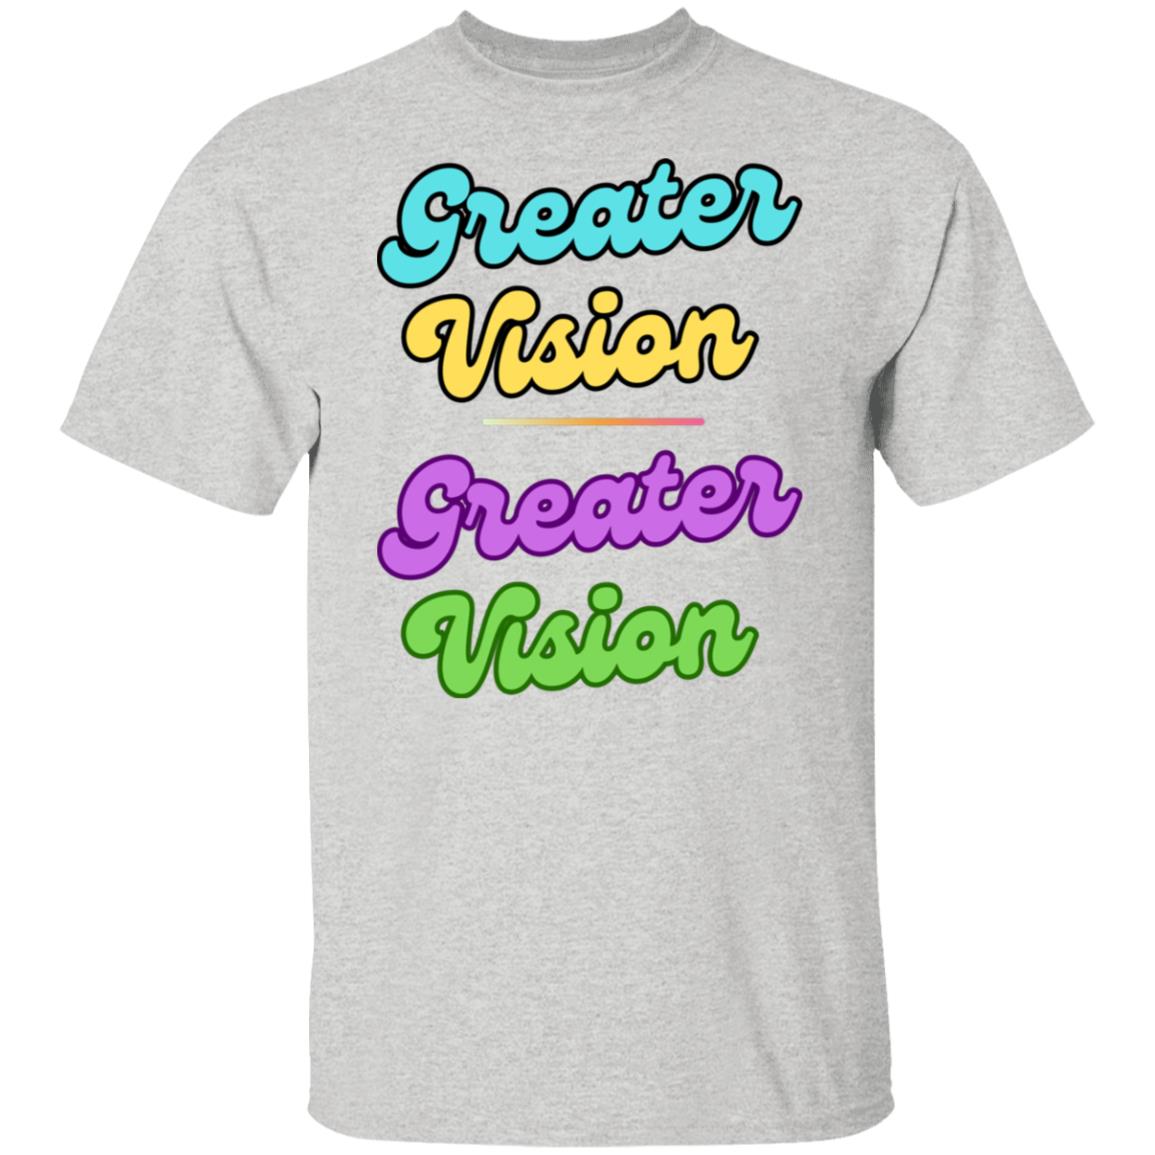 Greater Vision T-Shirt